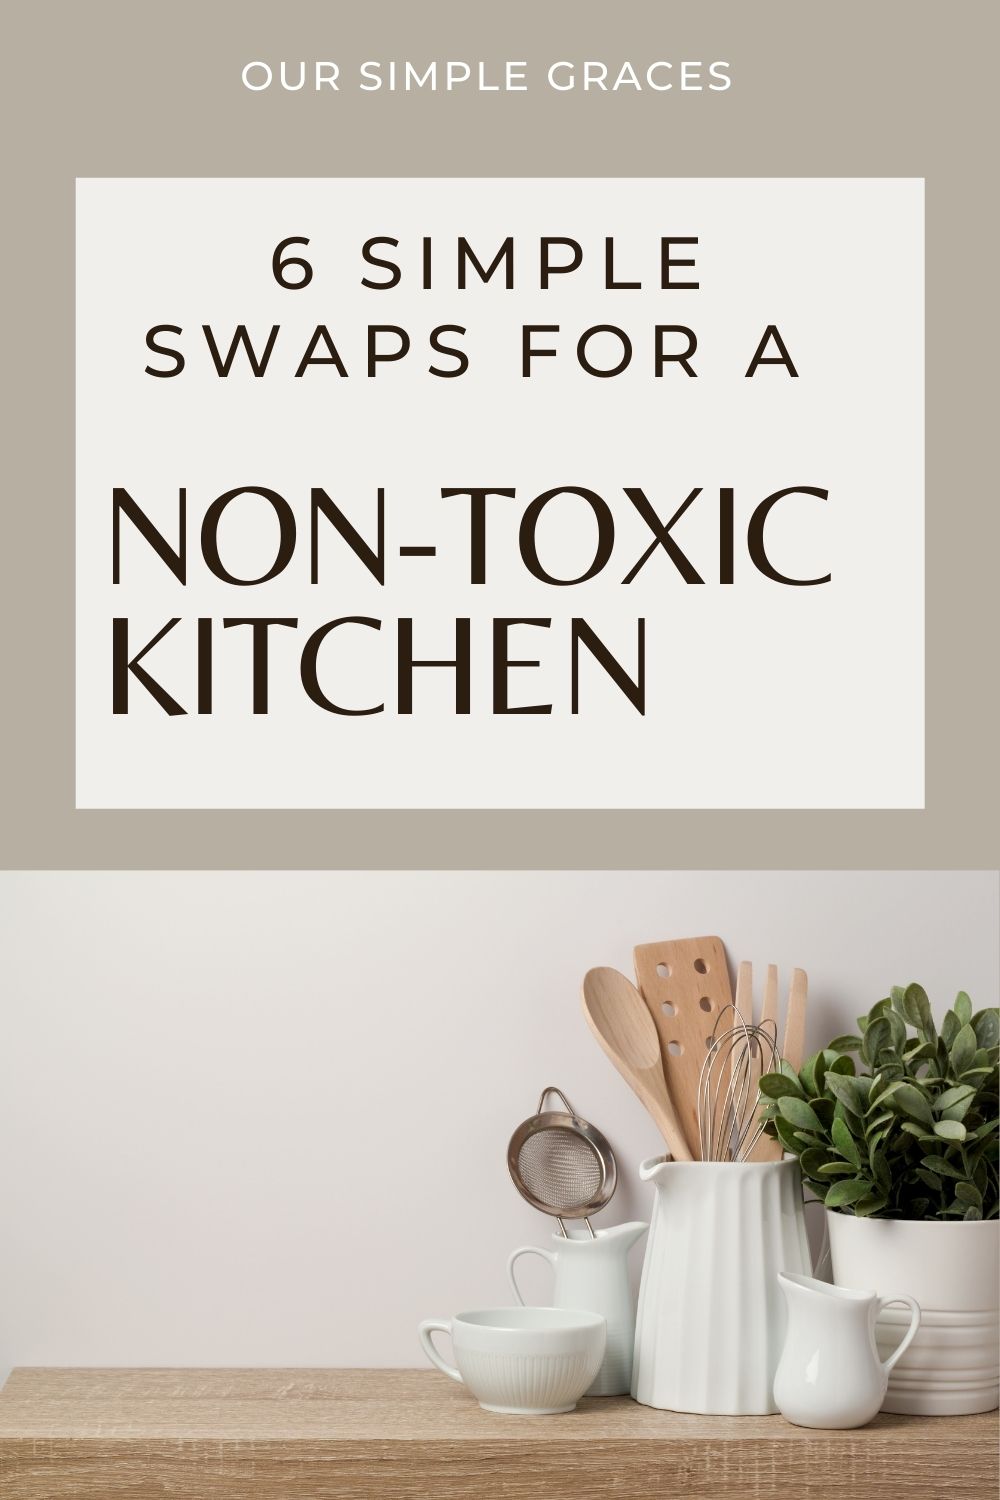 A simple Non-Toxic swap you can make. #plates #bowls #tupperware